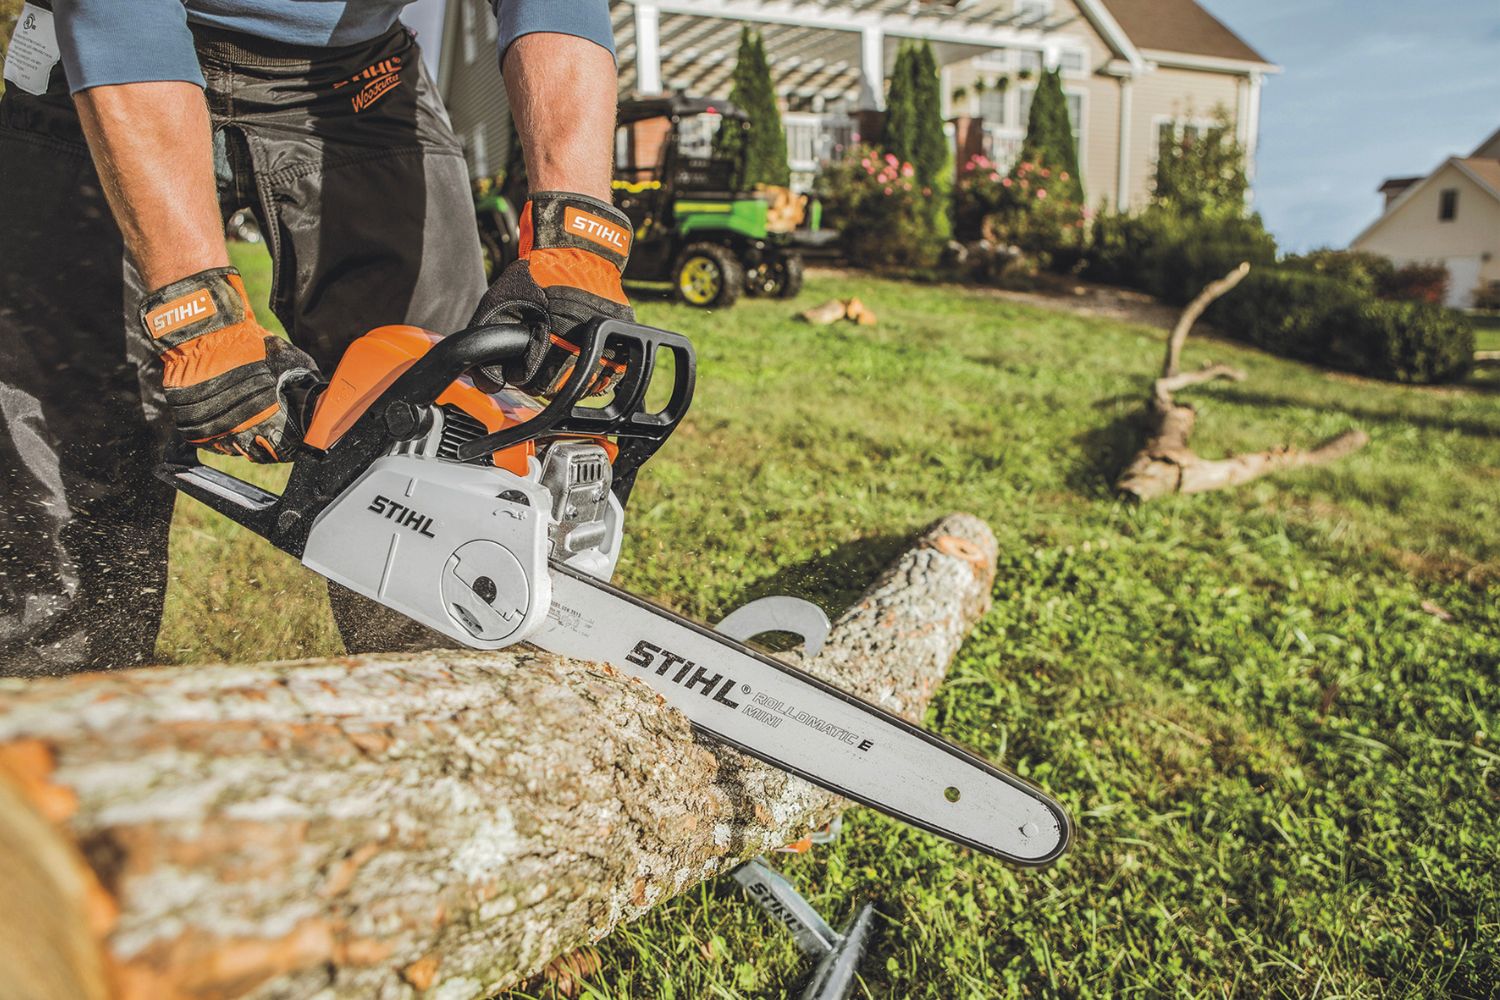 The Best Stihl Chainsaw Options